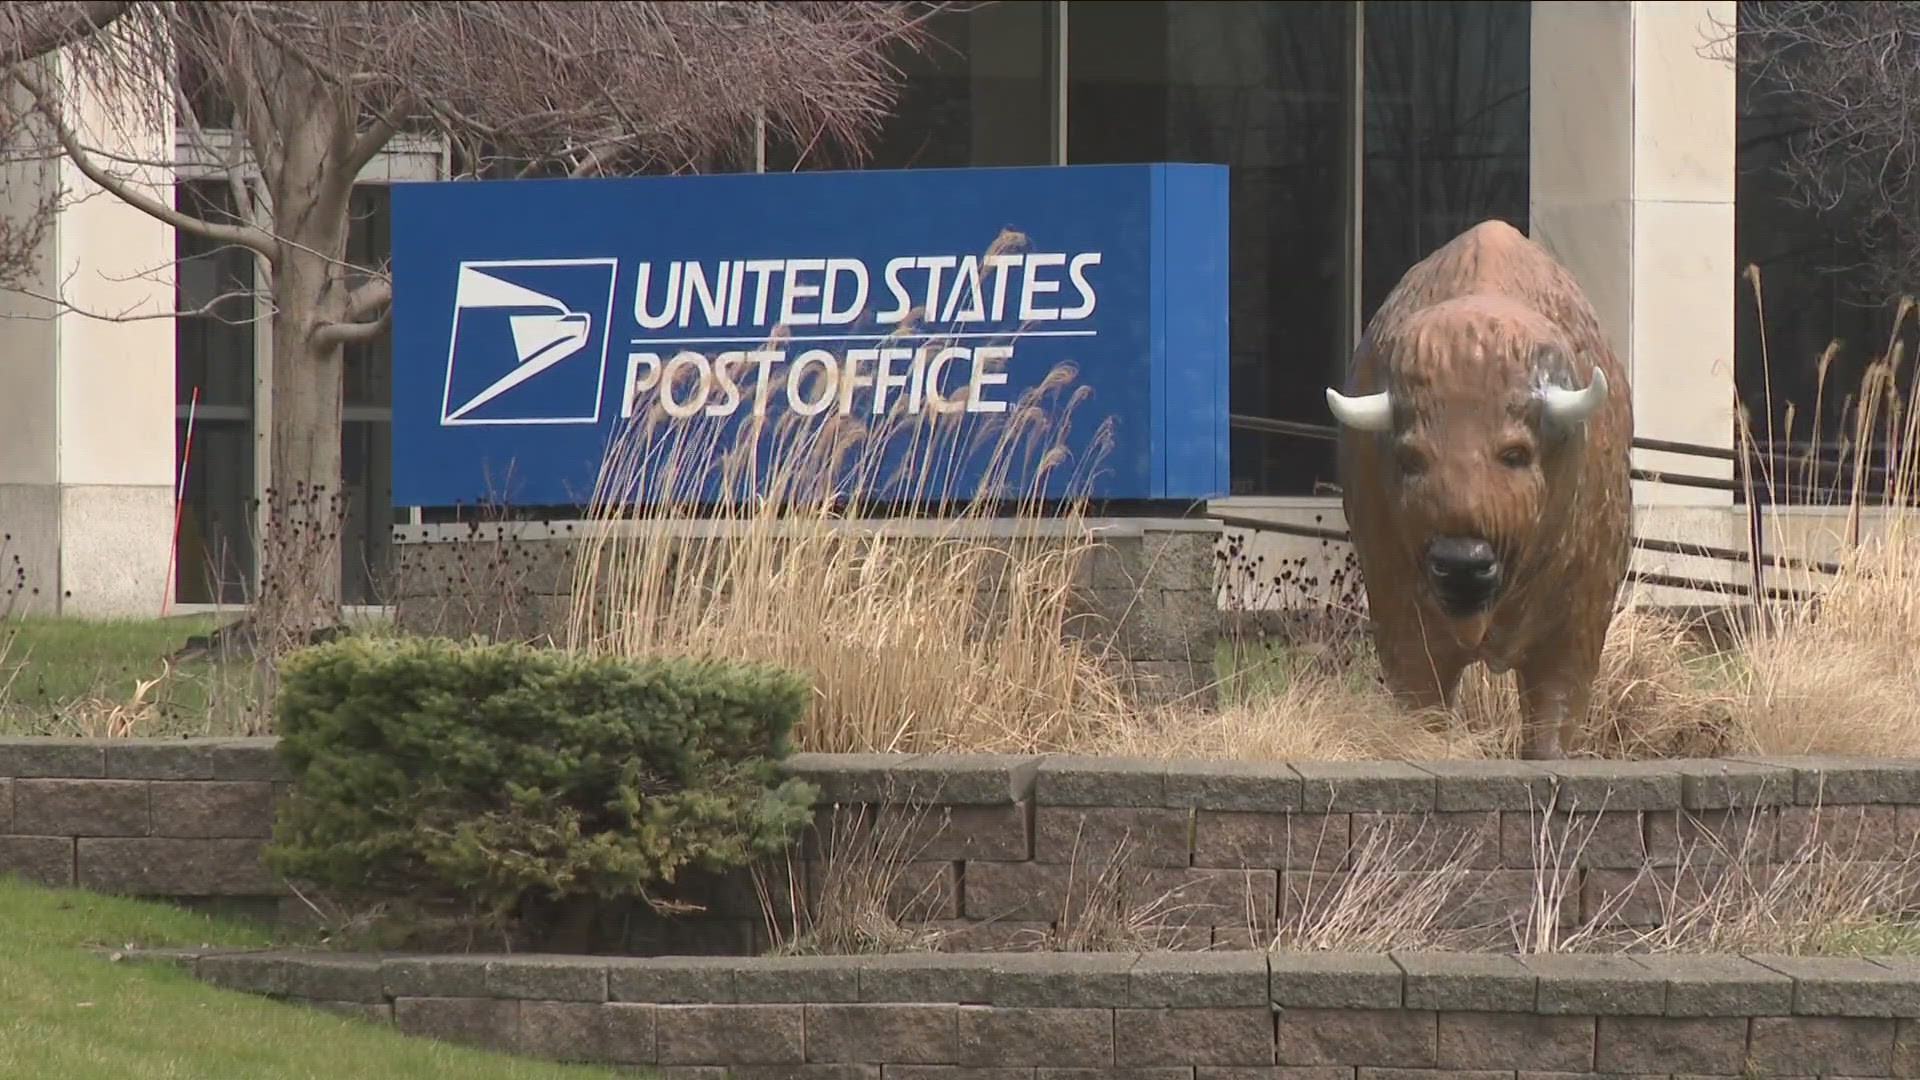 USPS made the decision Friday that operations of the William Street location will remain unchanged.